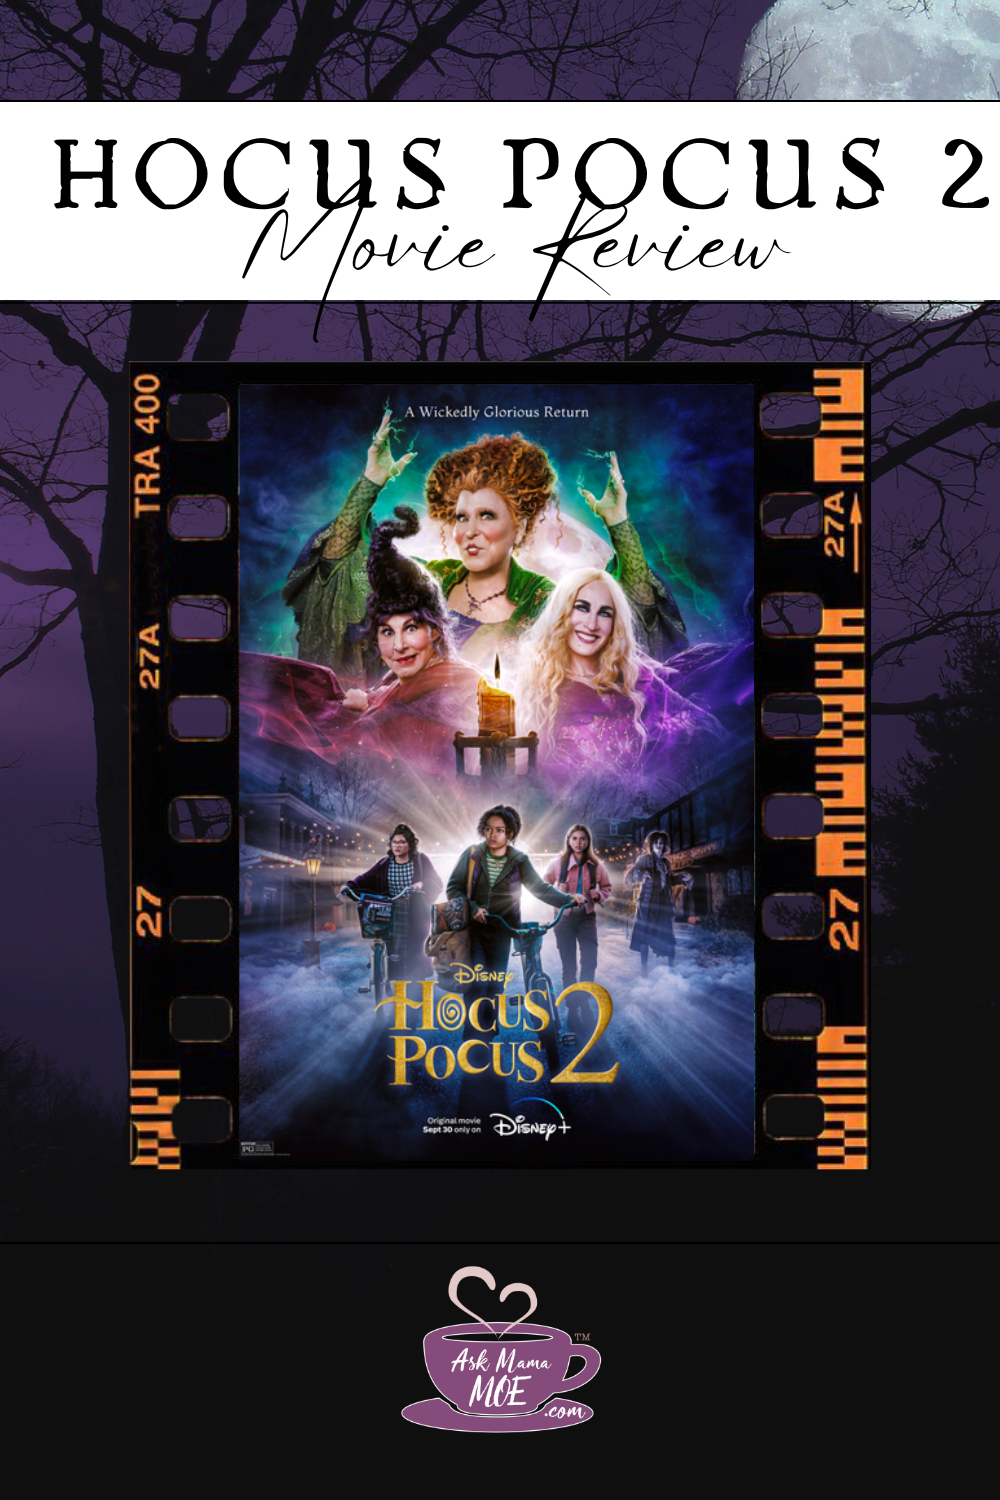 The time has come! Hocus Pocus 2 releases on Disney+ on September 30 and we've got the full scoop! Head over to our blog post to get a great no-spoiler Hocus Pocus 2 Review!